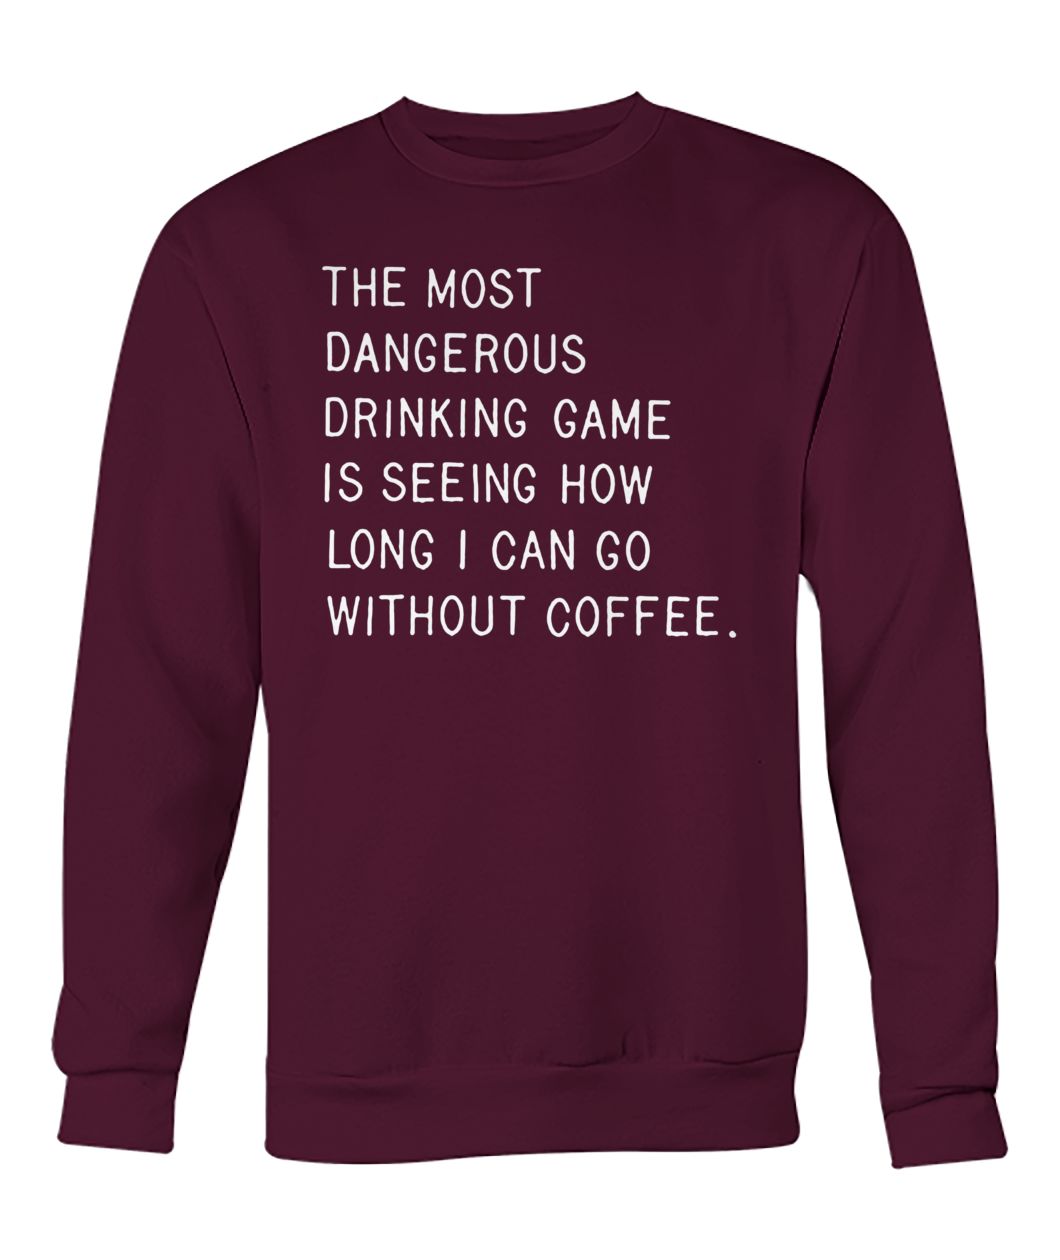 The most dangerous drinking game is seeing how long I can go without coffee crew neck sweatshirt